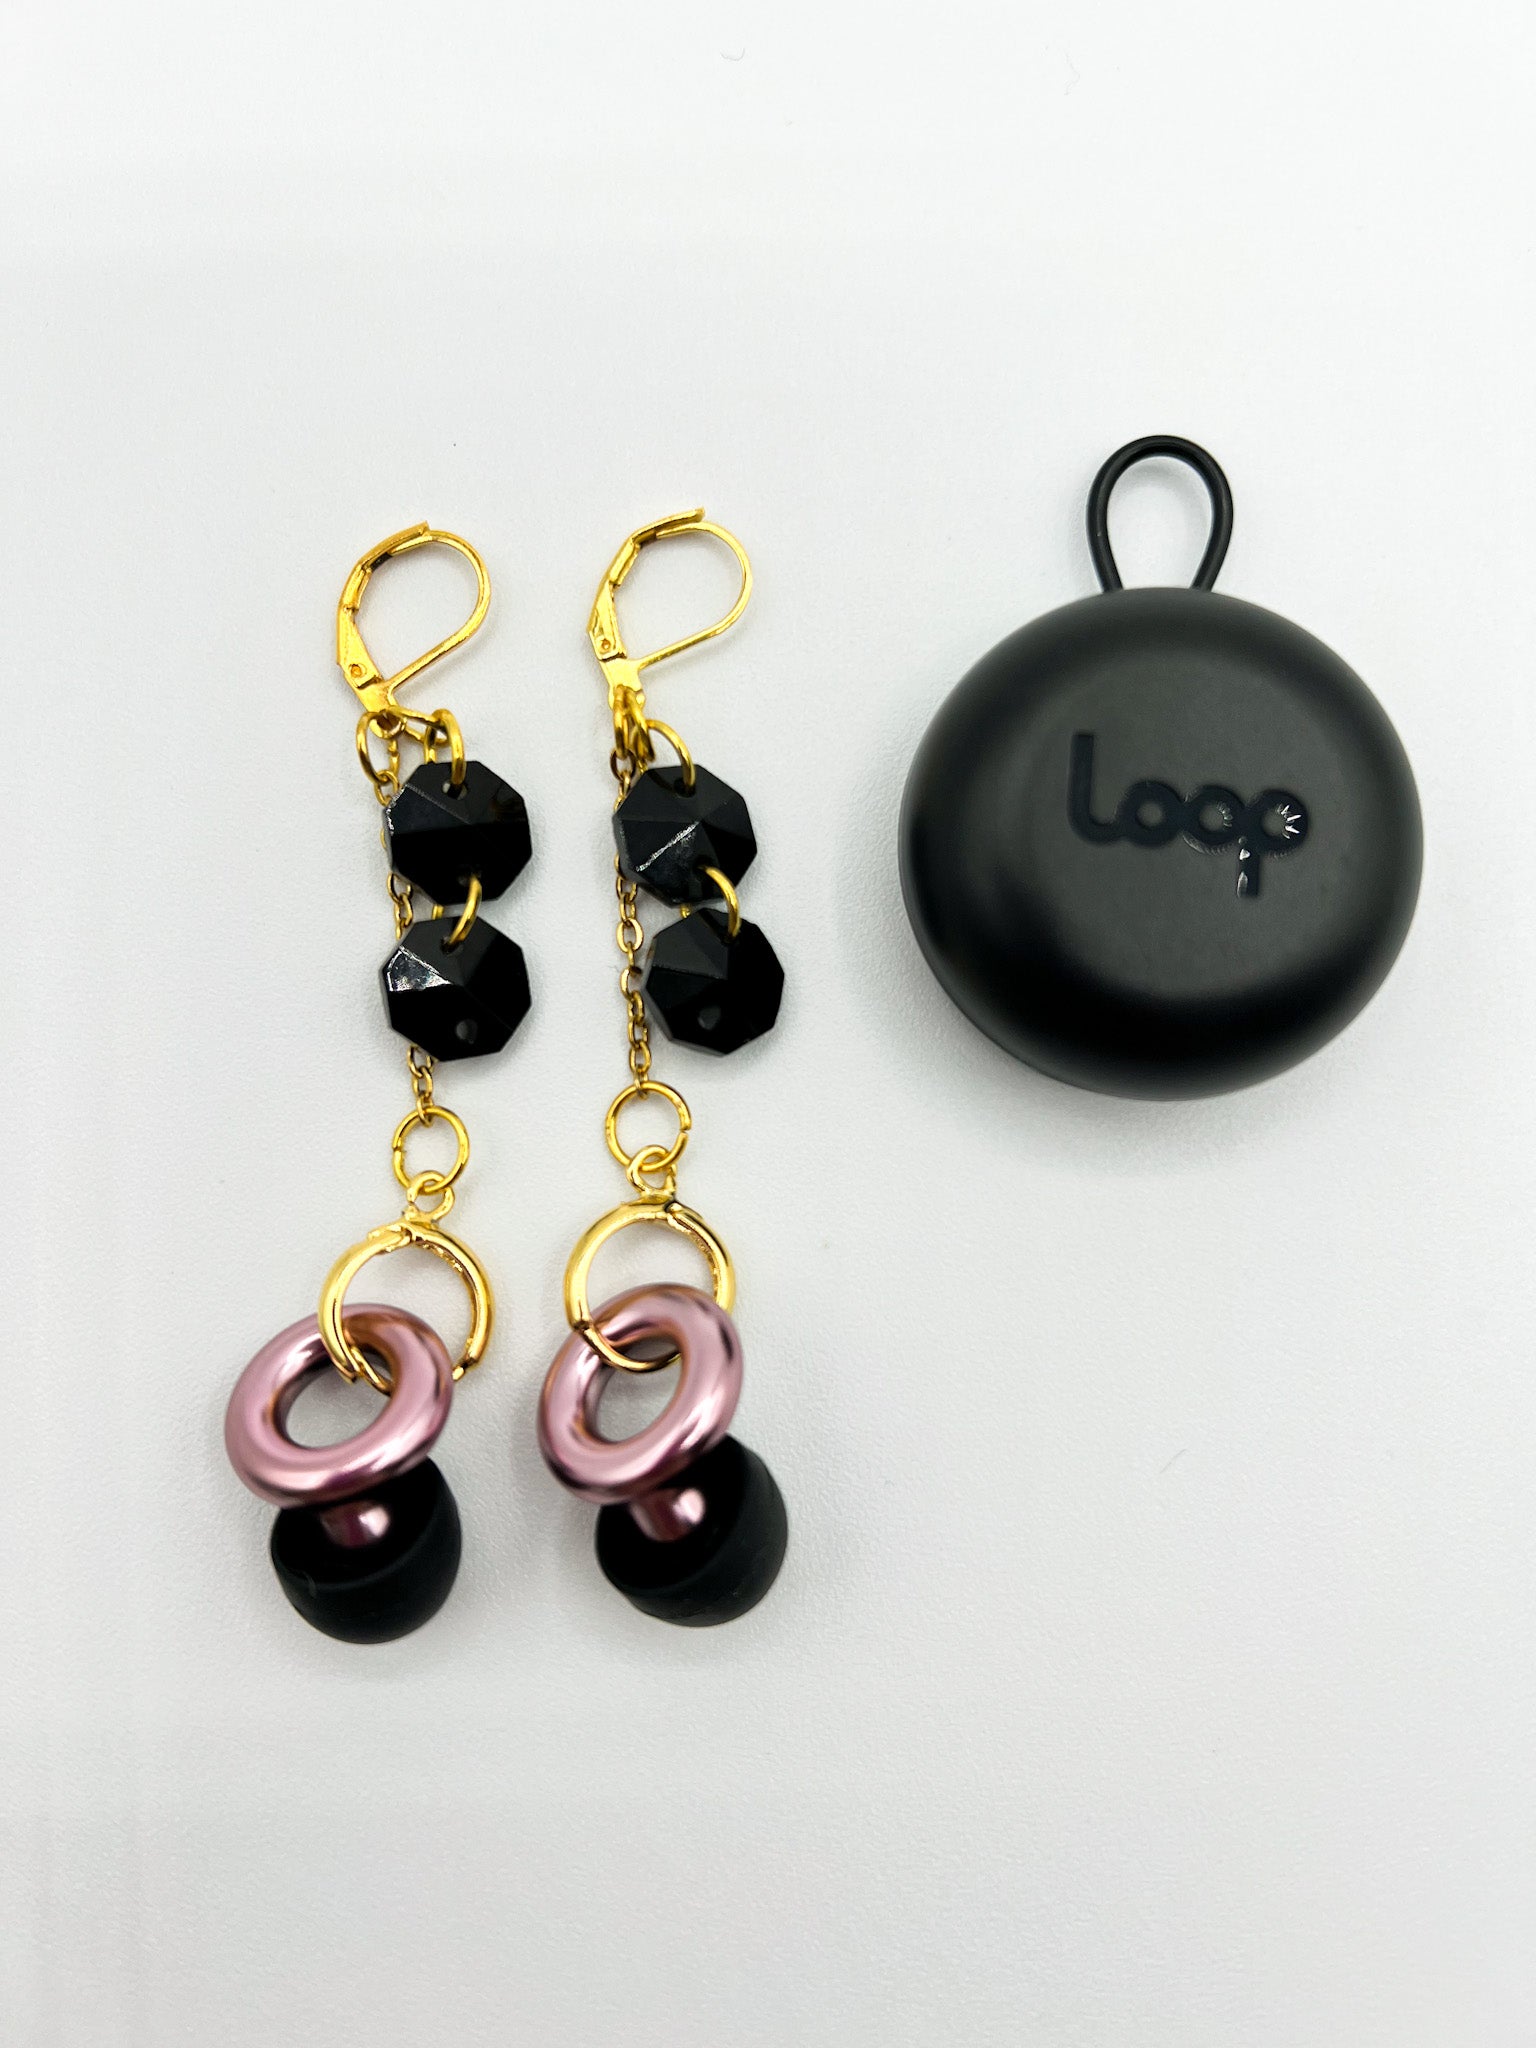 Loop Earplugs Review: Hearing Protection That Looks Like Jewelry